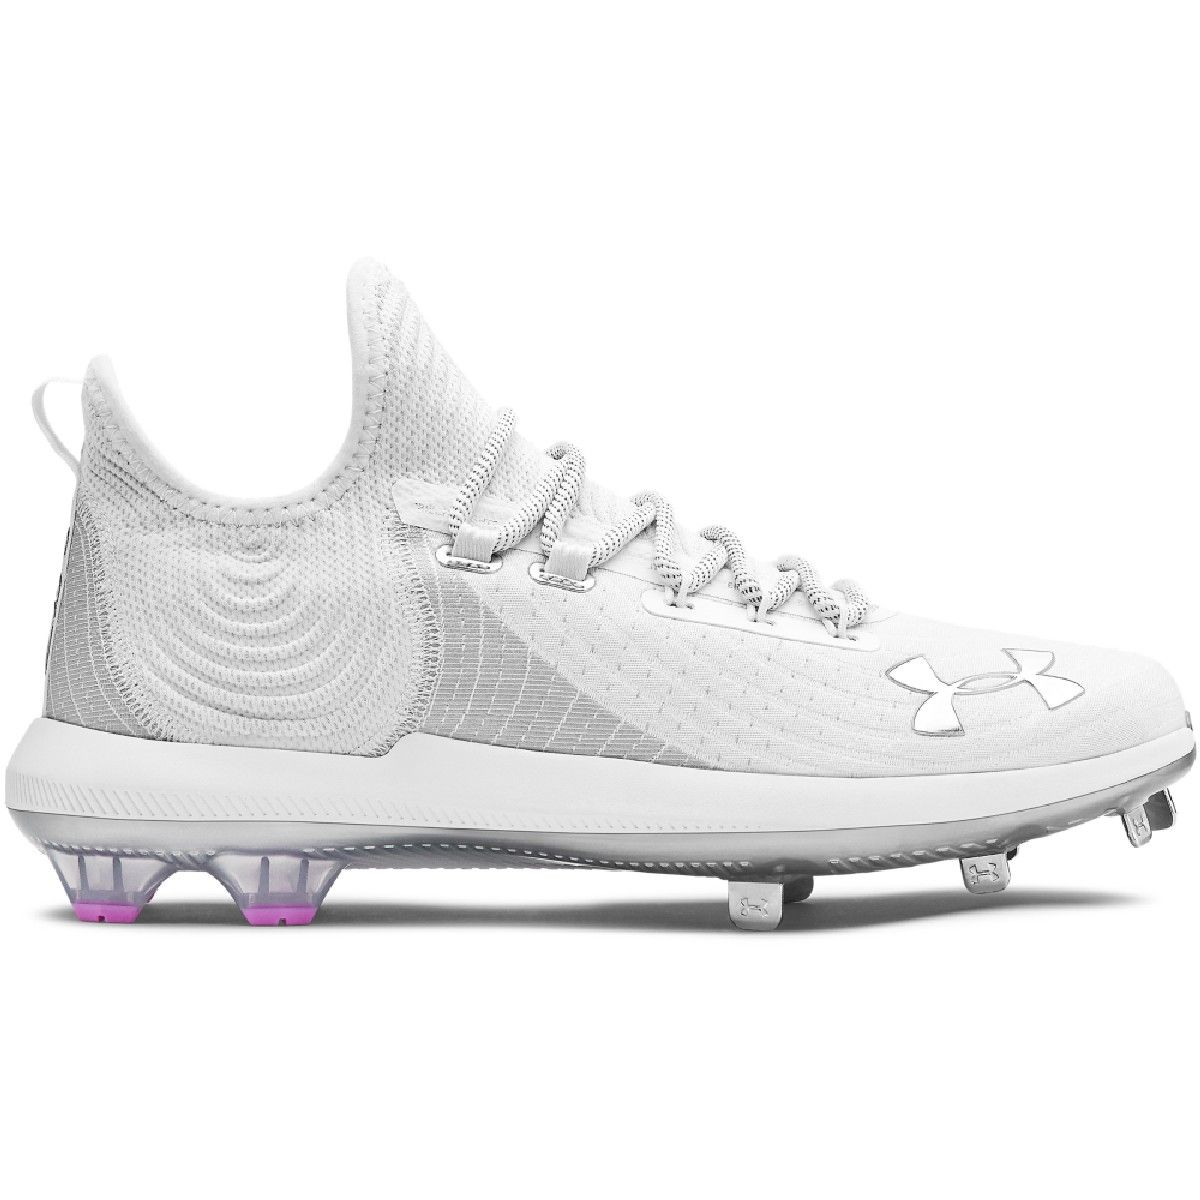 Check Out Some of Bryce Harper's Freshest Cleats - Washingtonian